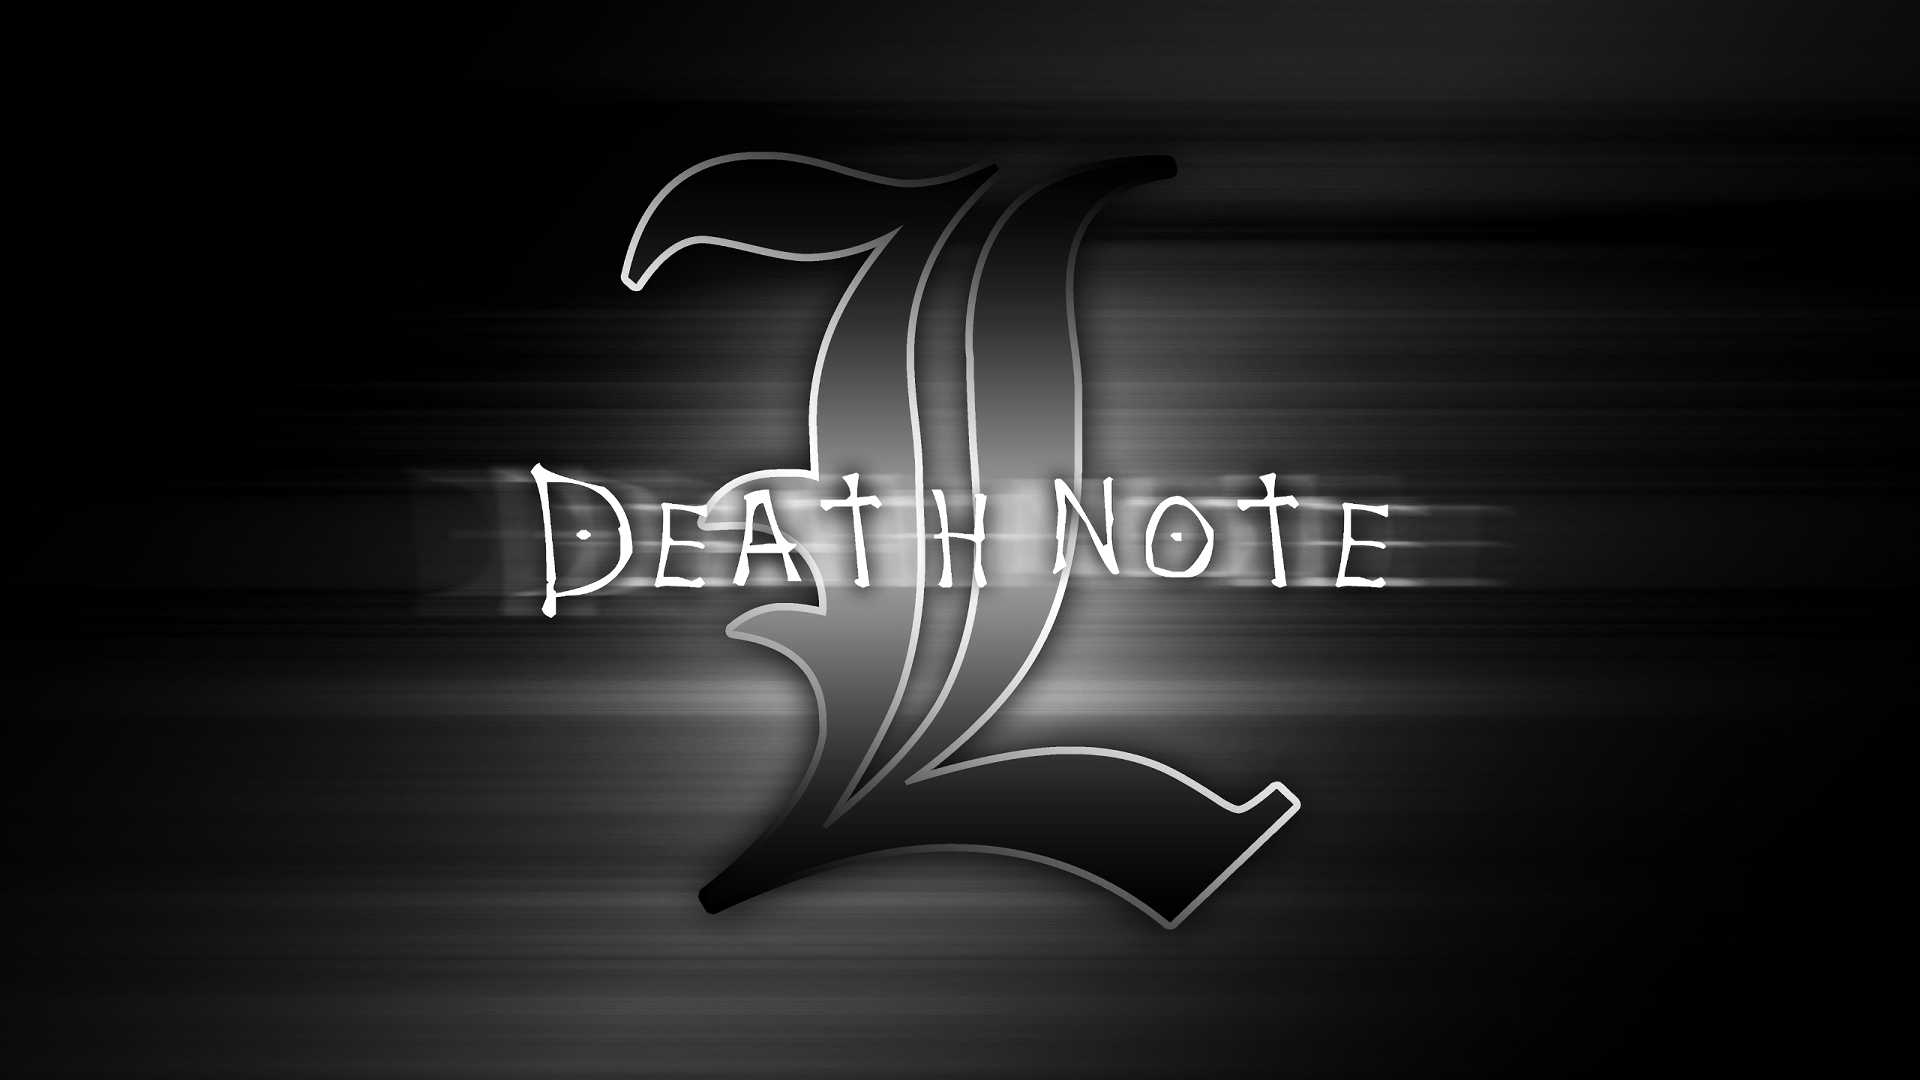 Death Note Hd Wallpaper Background Image 1920x1080 Id 740521 Wallpaper Abyss